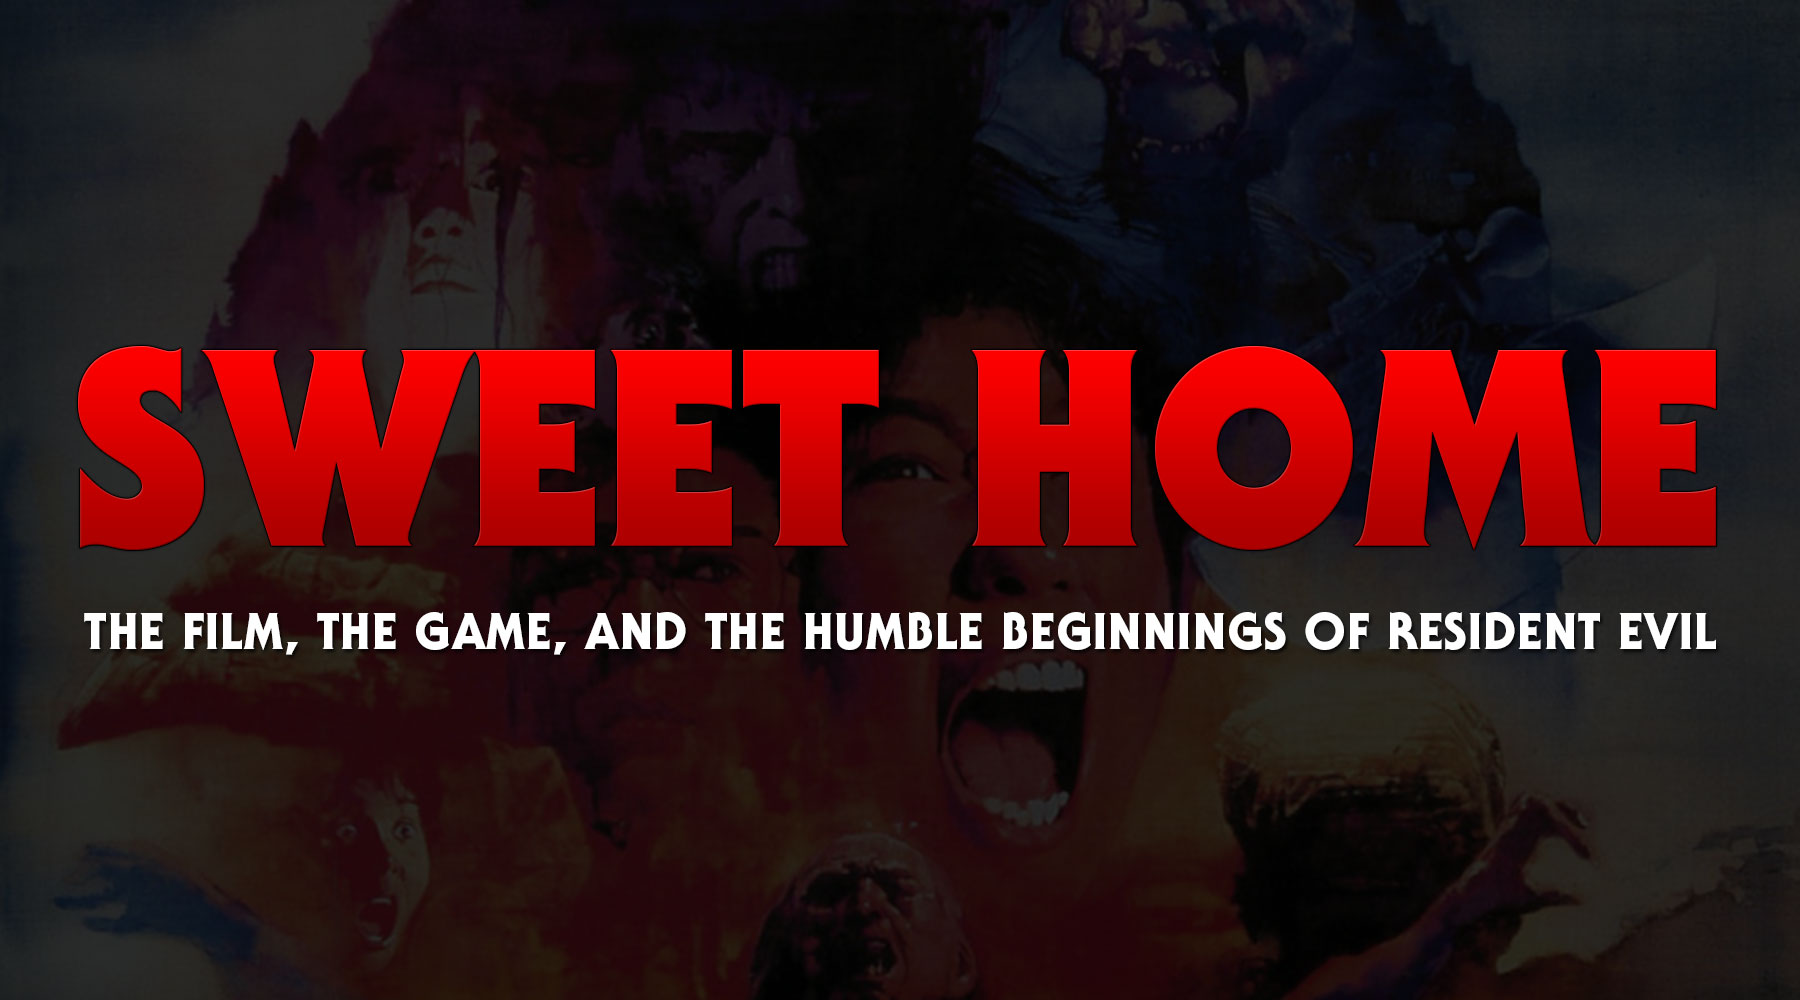 Sweet Home: The Film, The Game, and the Humble Beginnings of Resident Evil